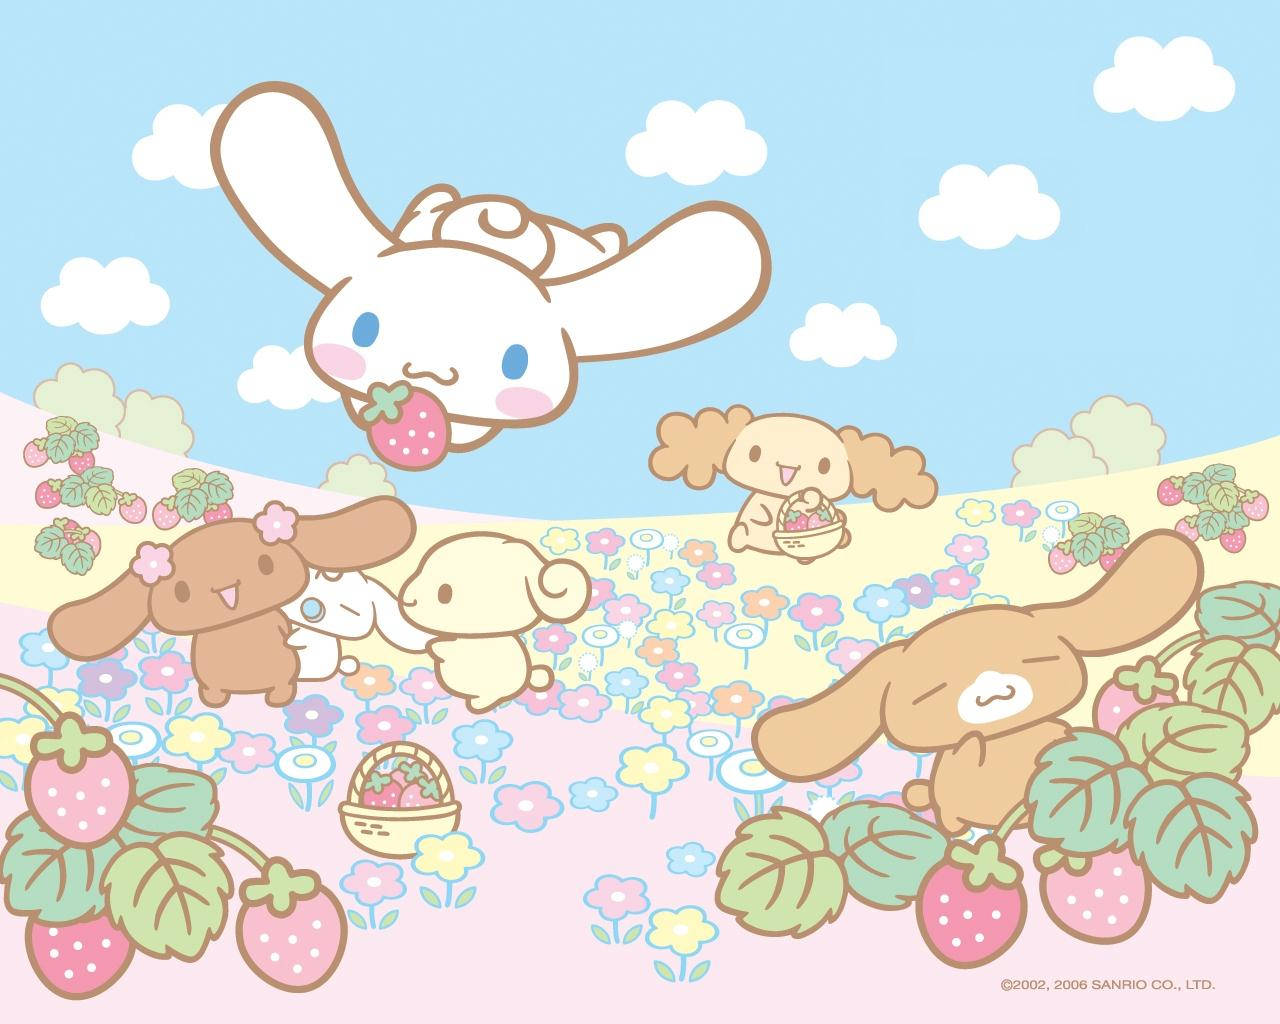 Experience Total Adorableness with Sanrio's Cinnamoroll and Cinnamoangels Wallpaper